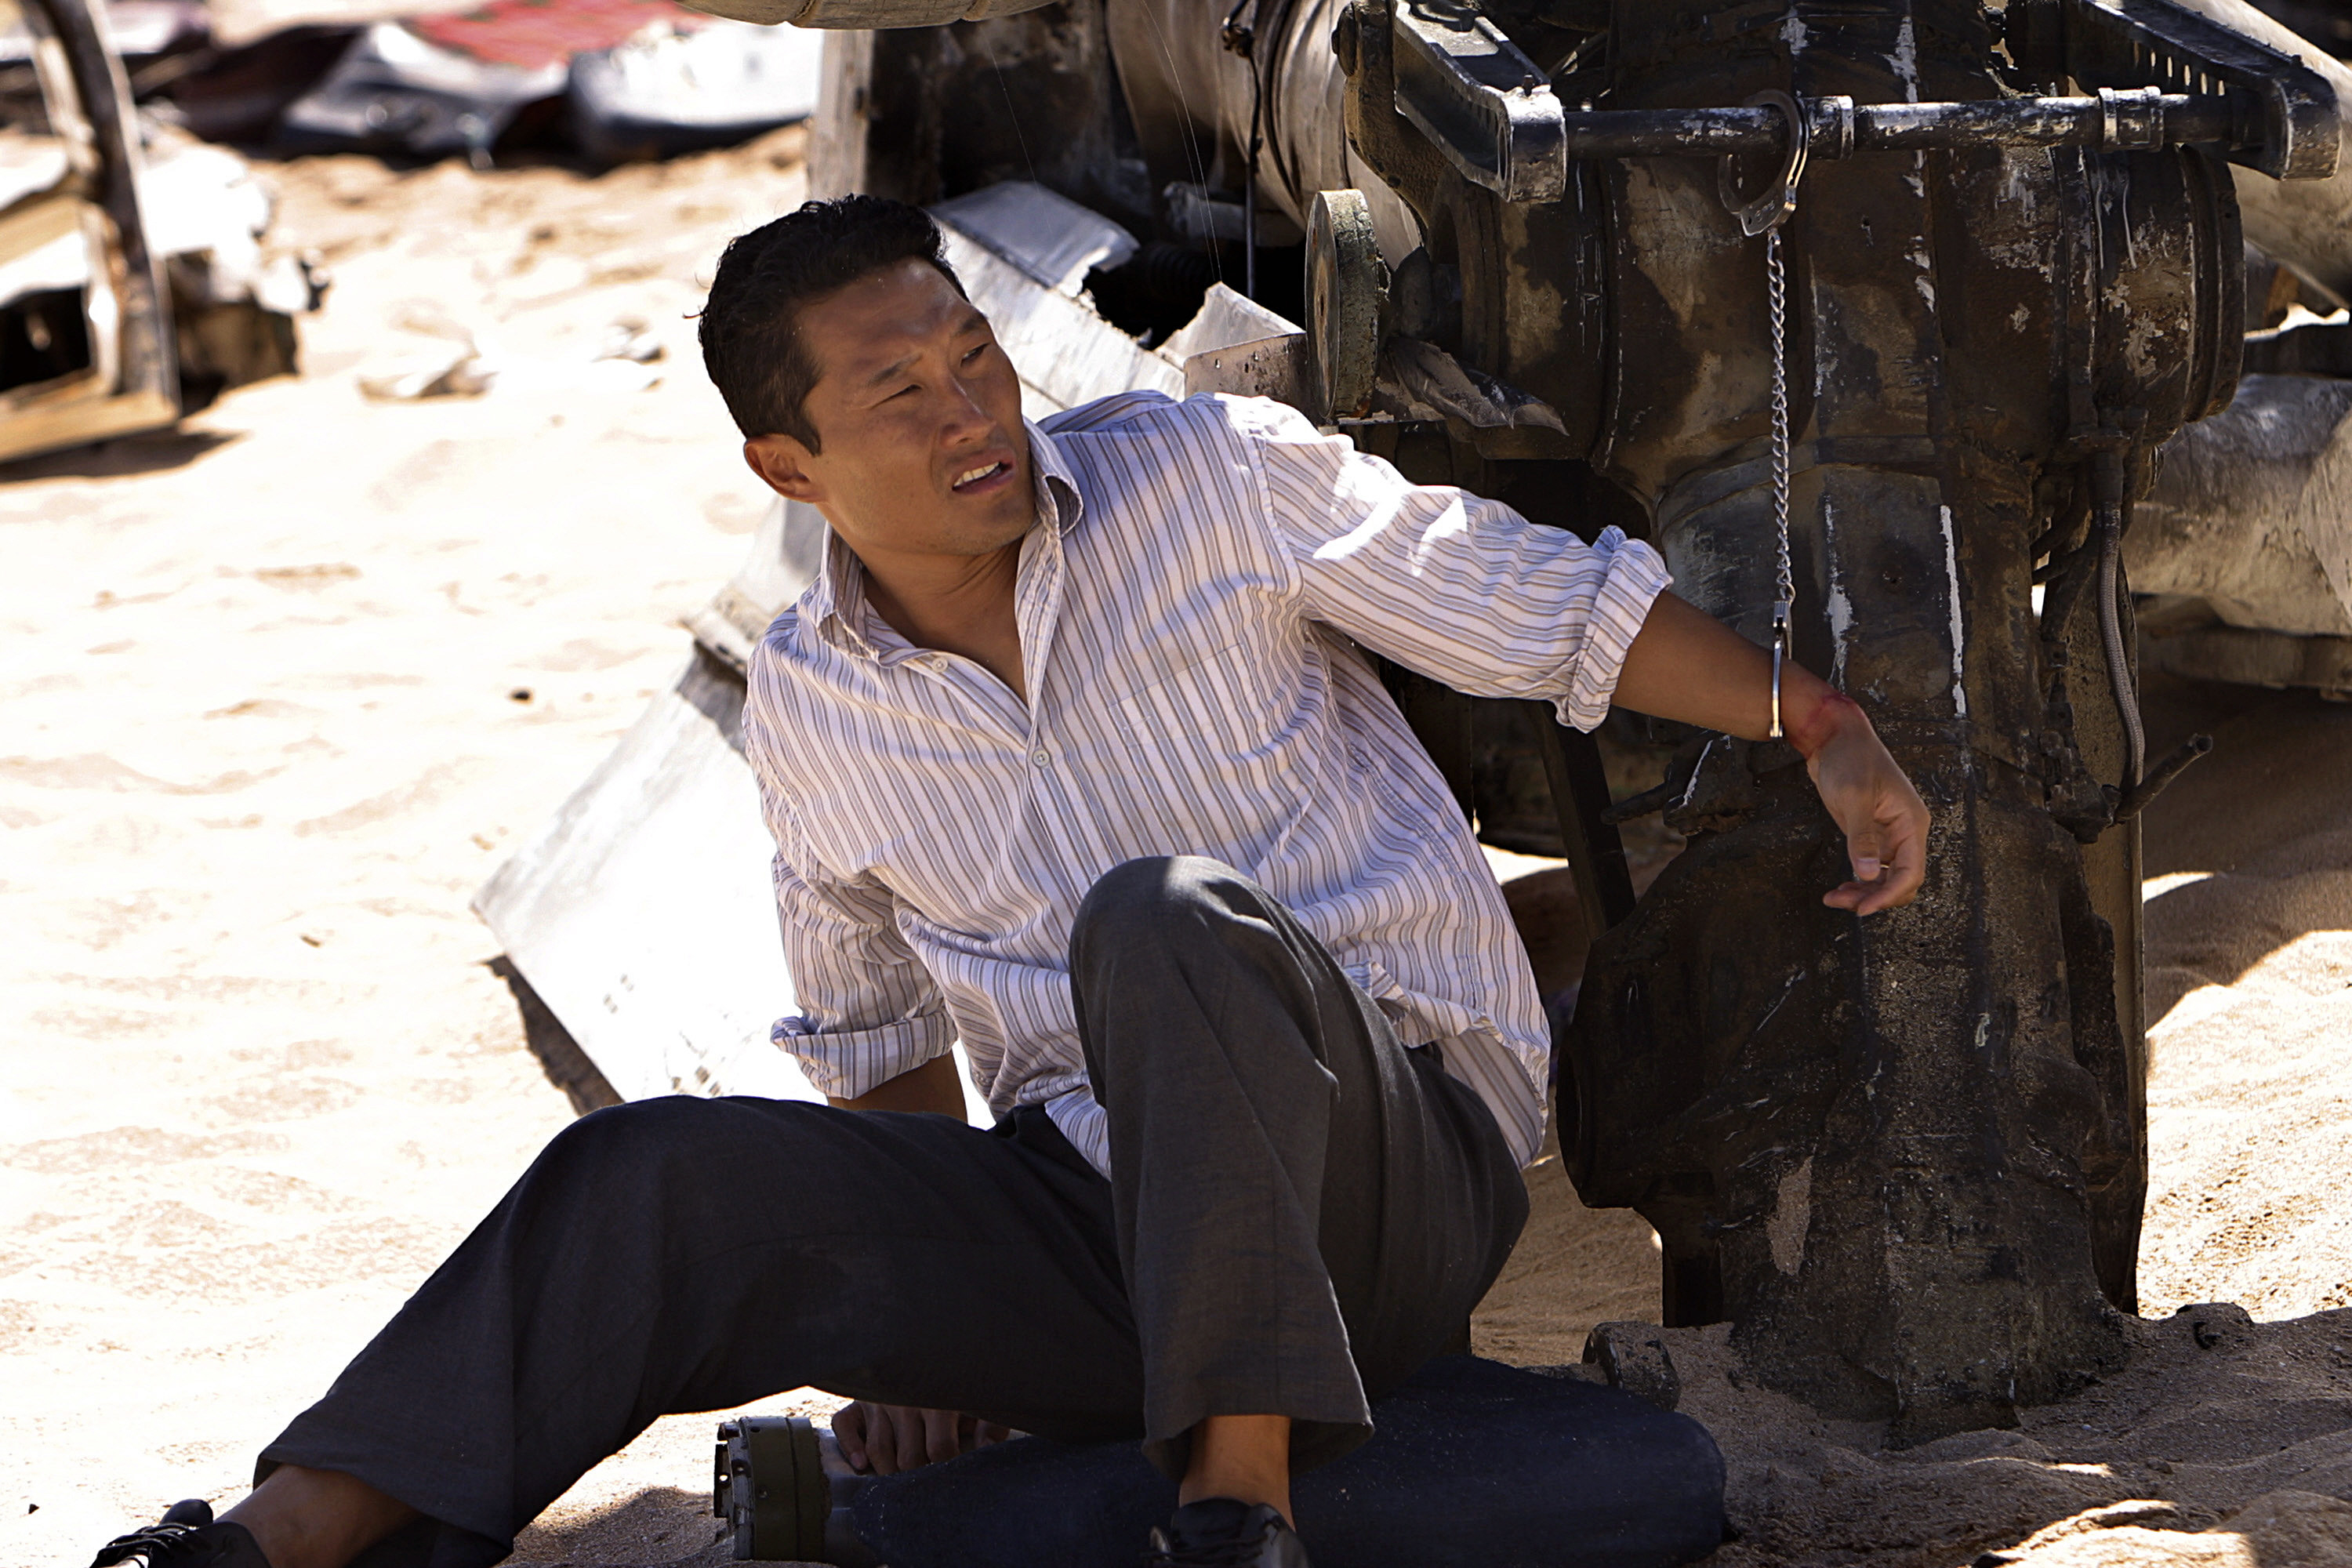 Daniel sitting on sand in a scene from Lost